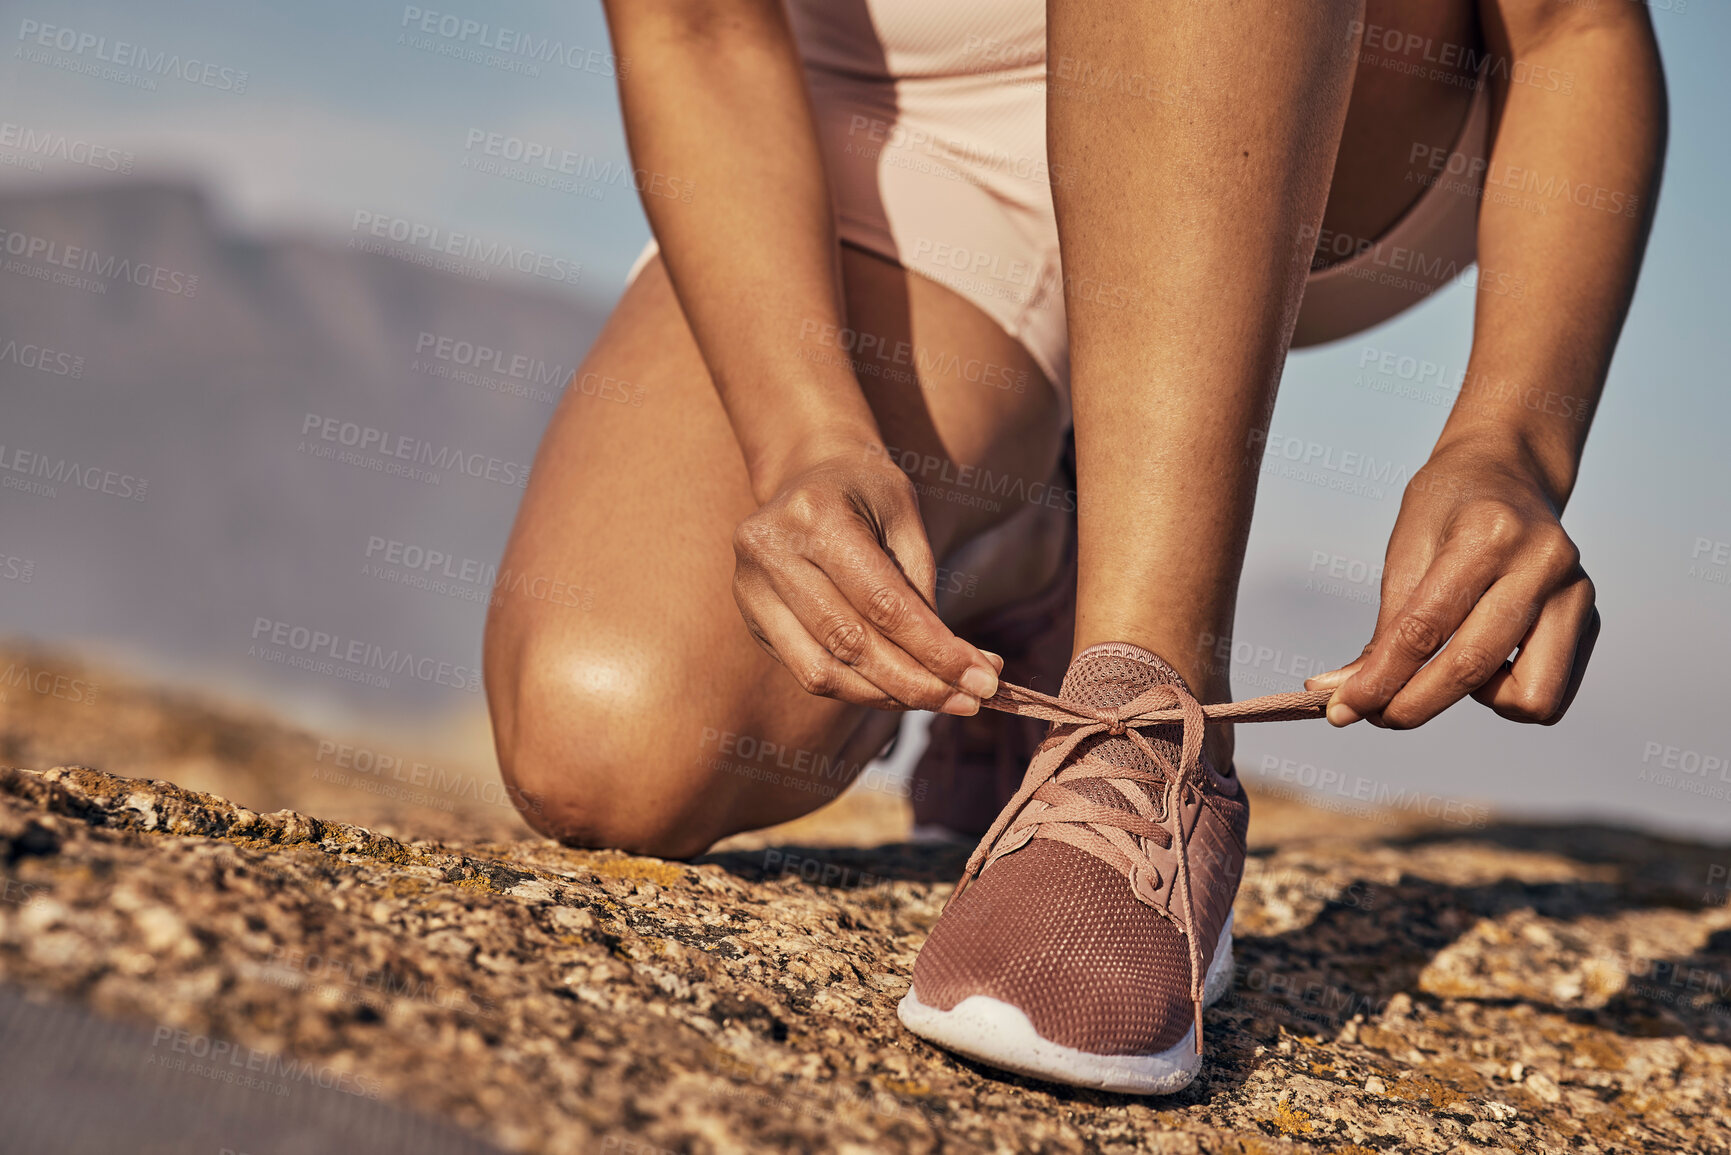 Buy stock photo Hands, hiking and tie shoes in nature to start running, workout or training. Sports, wellness and female or woman tying sneaker laces or footwear to get ready for exercising, cardio or hike outdoors.